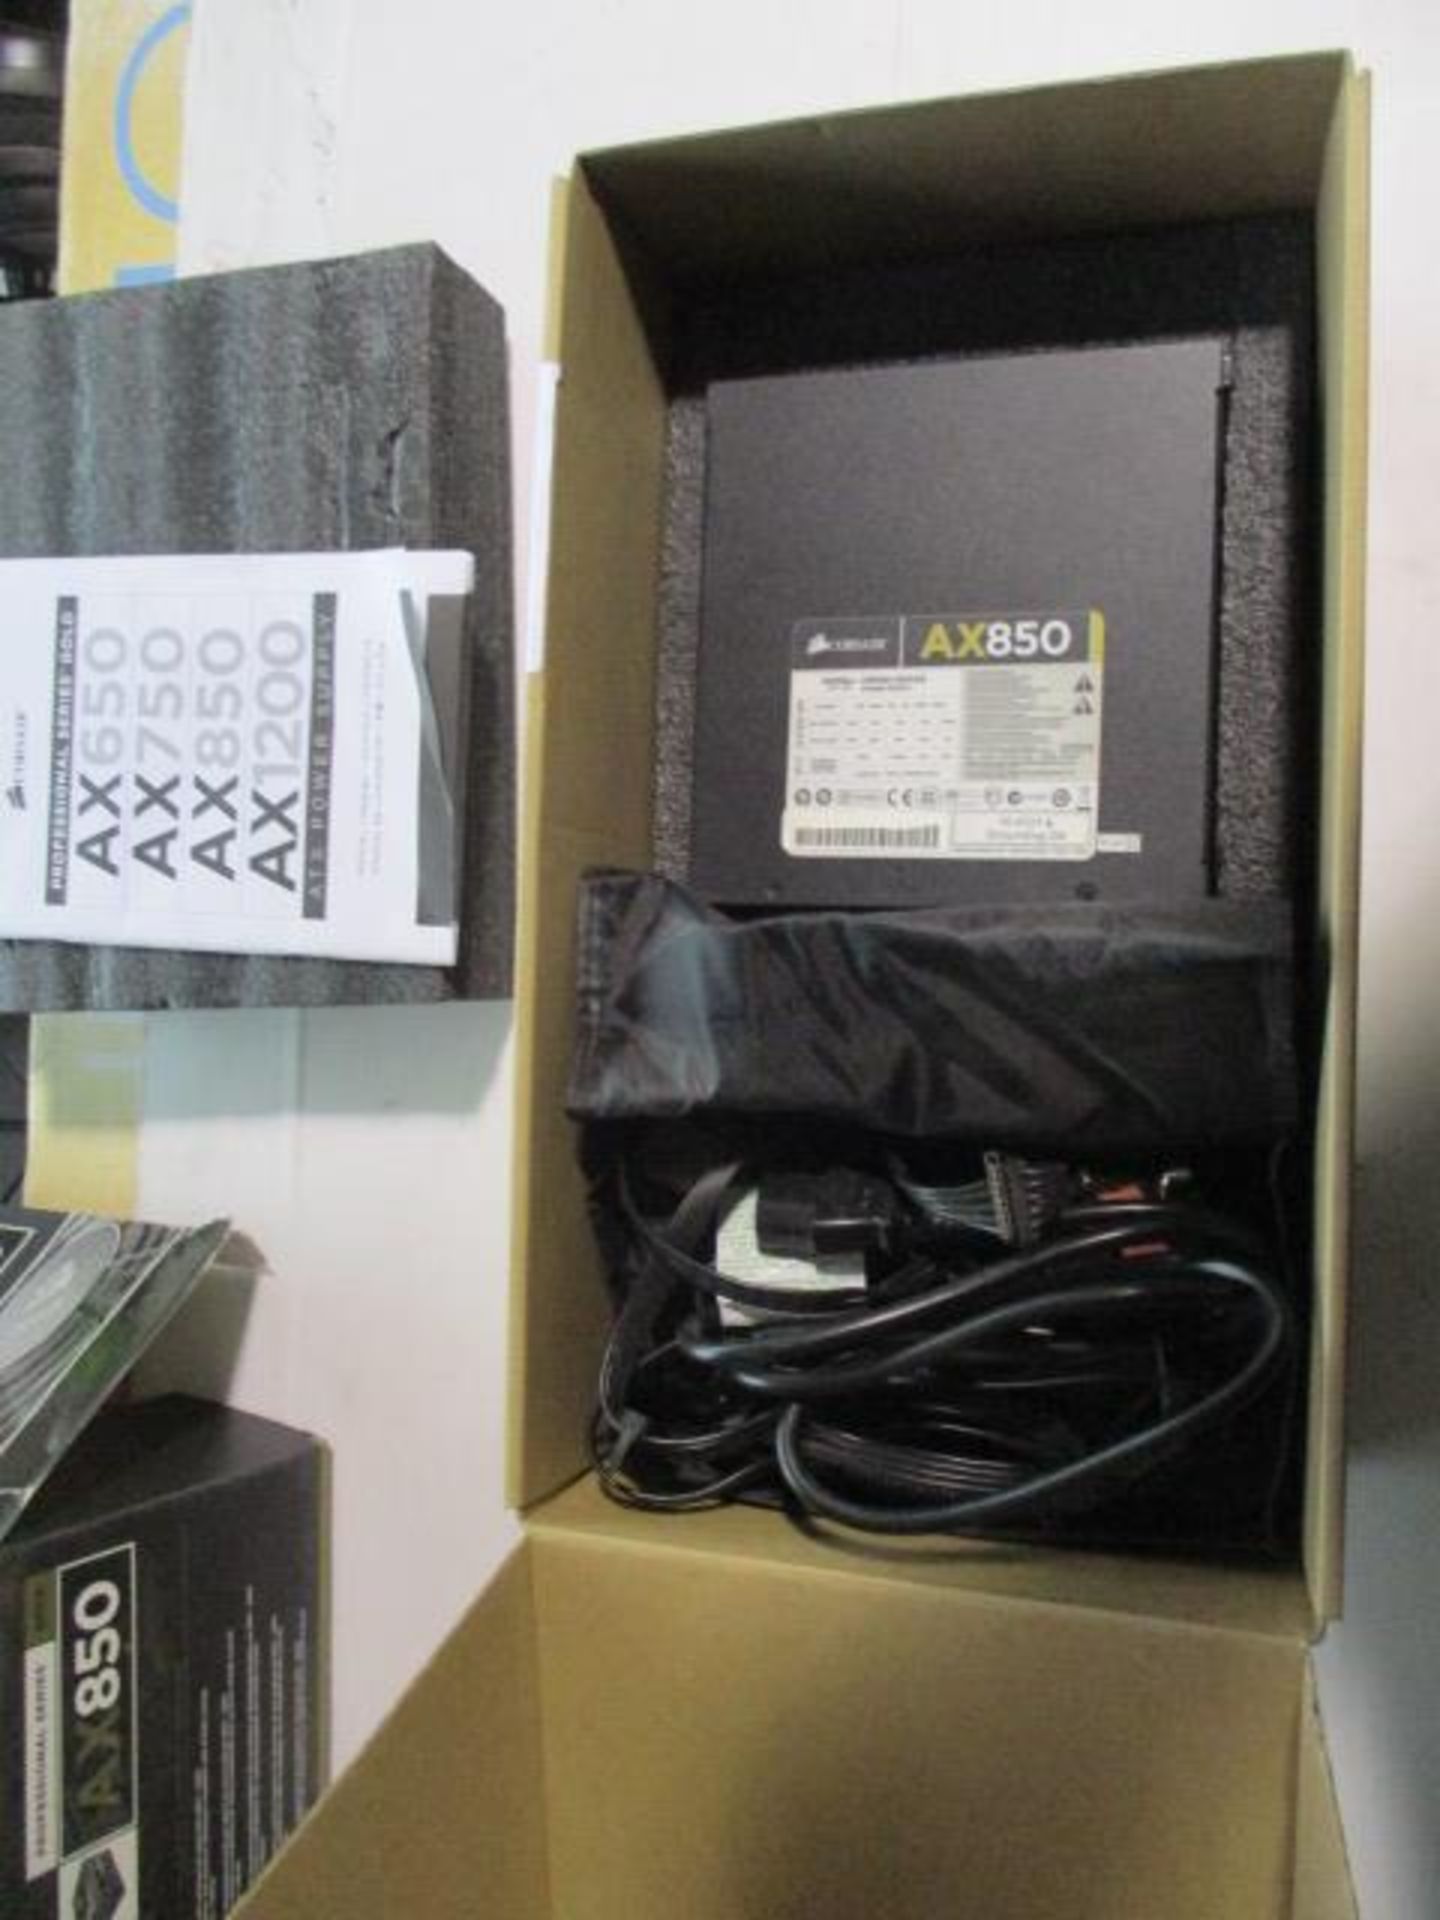 Corsair AX850 fan system premium PSU boxed and unchecked rrp £100+ - Image 4 of 4